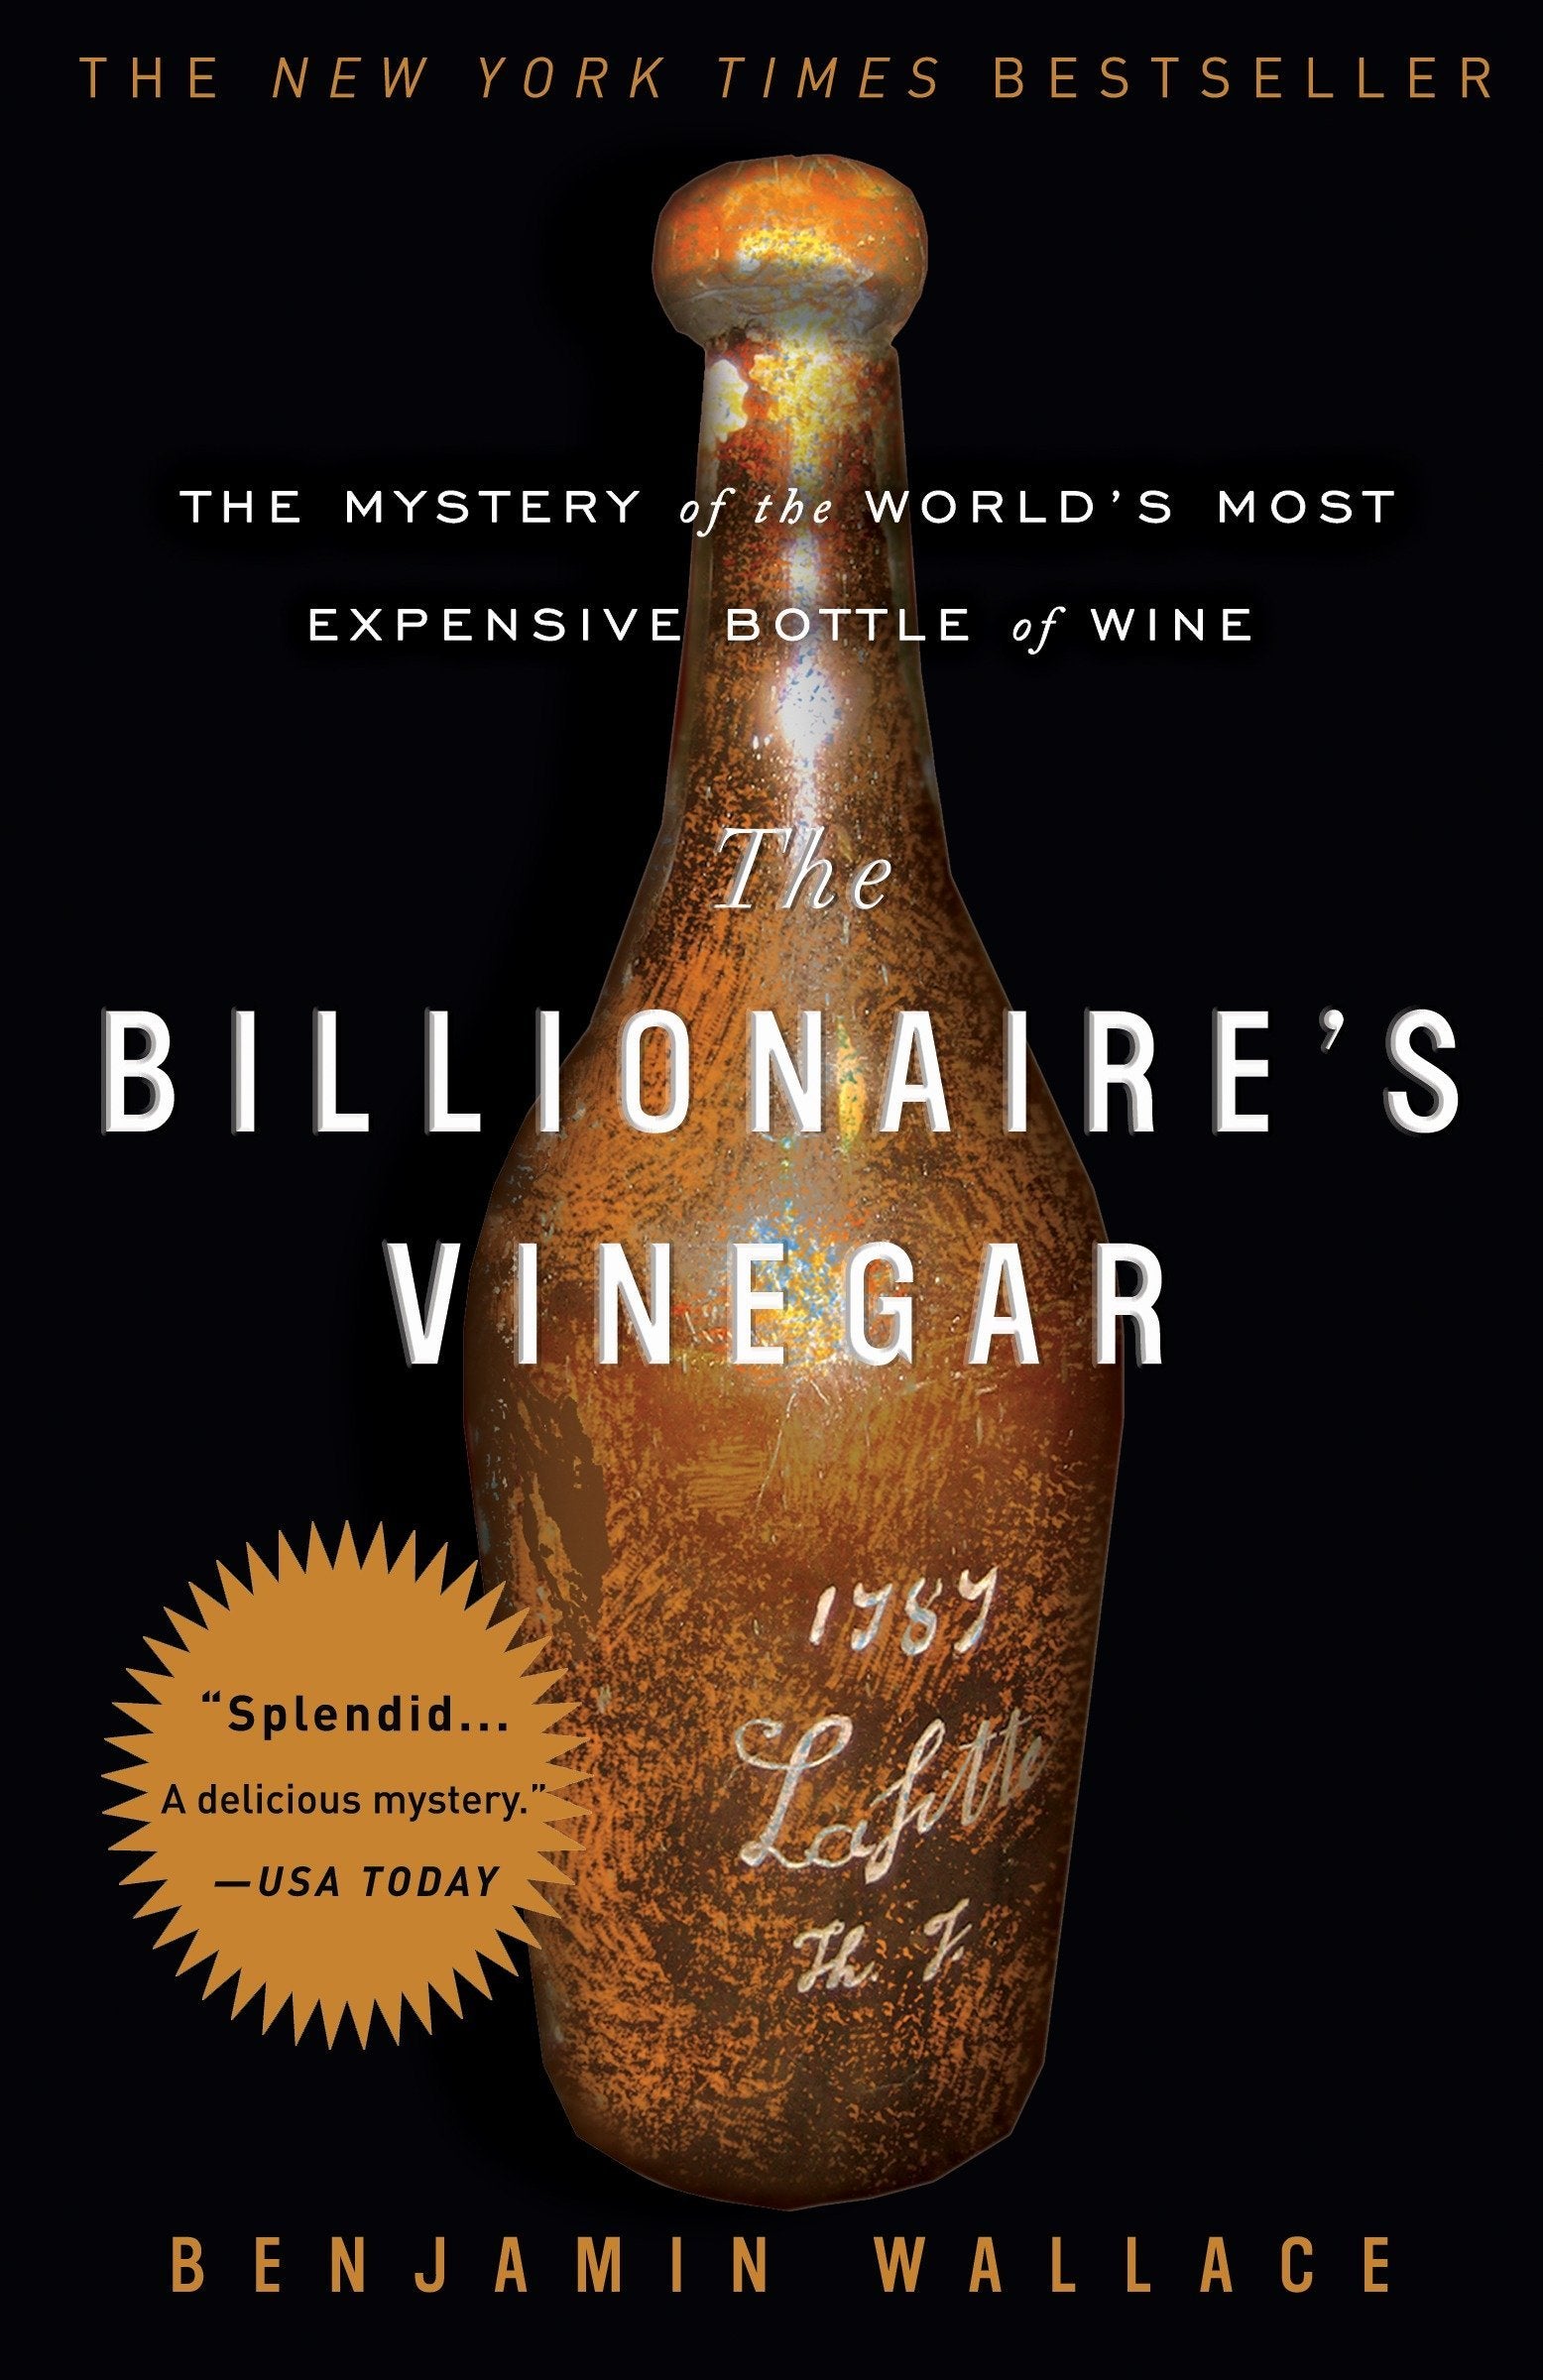 The Billionaire's Vinegar: The Mystery of the World's Most Expensive Bottle of Wine (Benjamin Wallace)